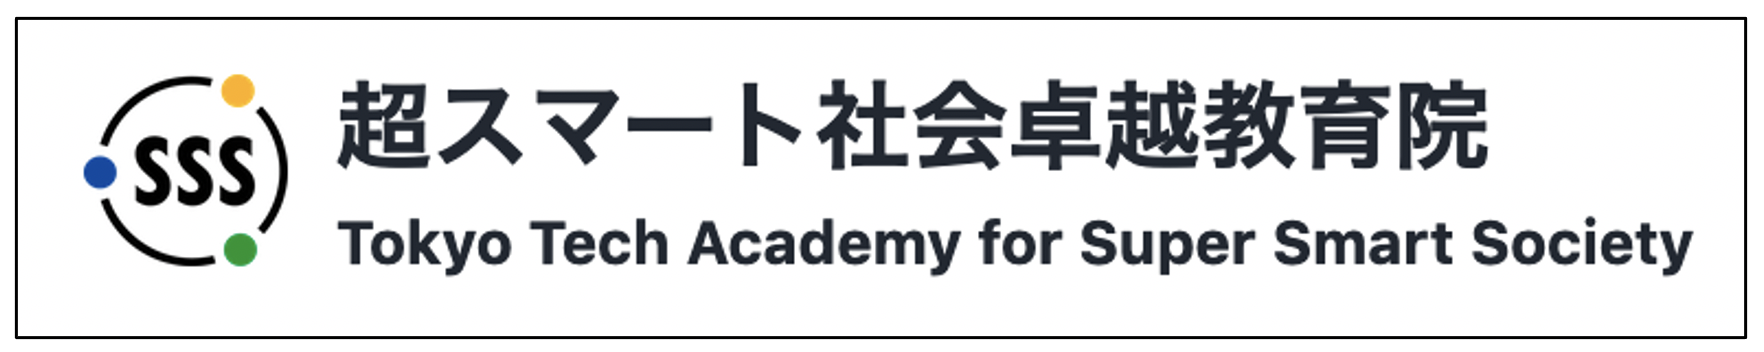 Tokyo Tech Academy for Super Smart Society(SSS)